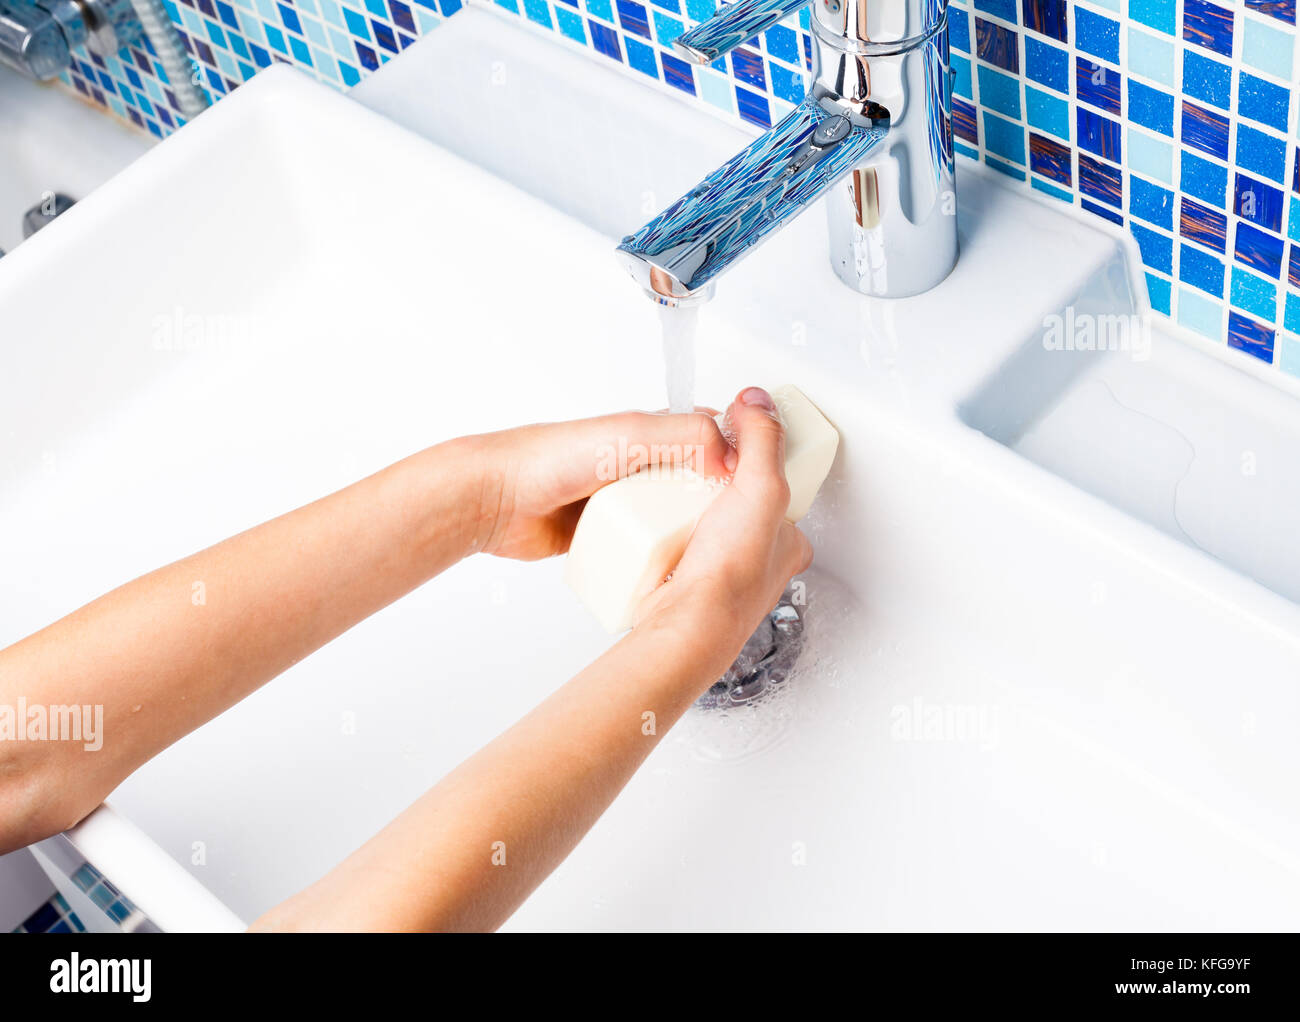 Girl washing her hands with soap in a bathroom sink Stock Photo